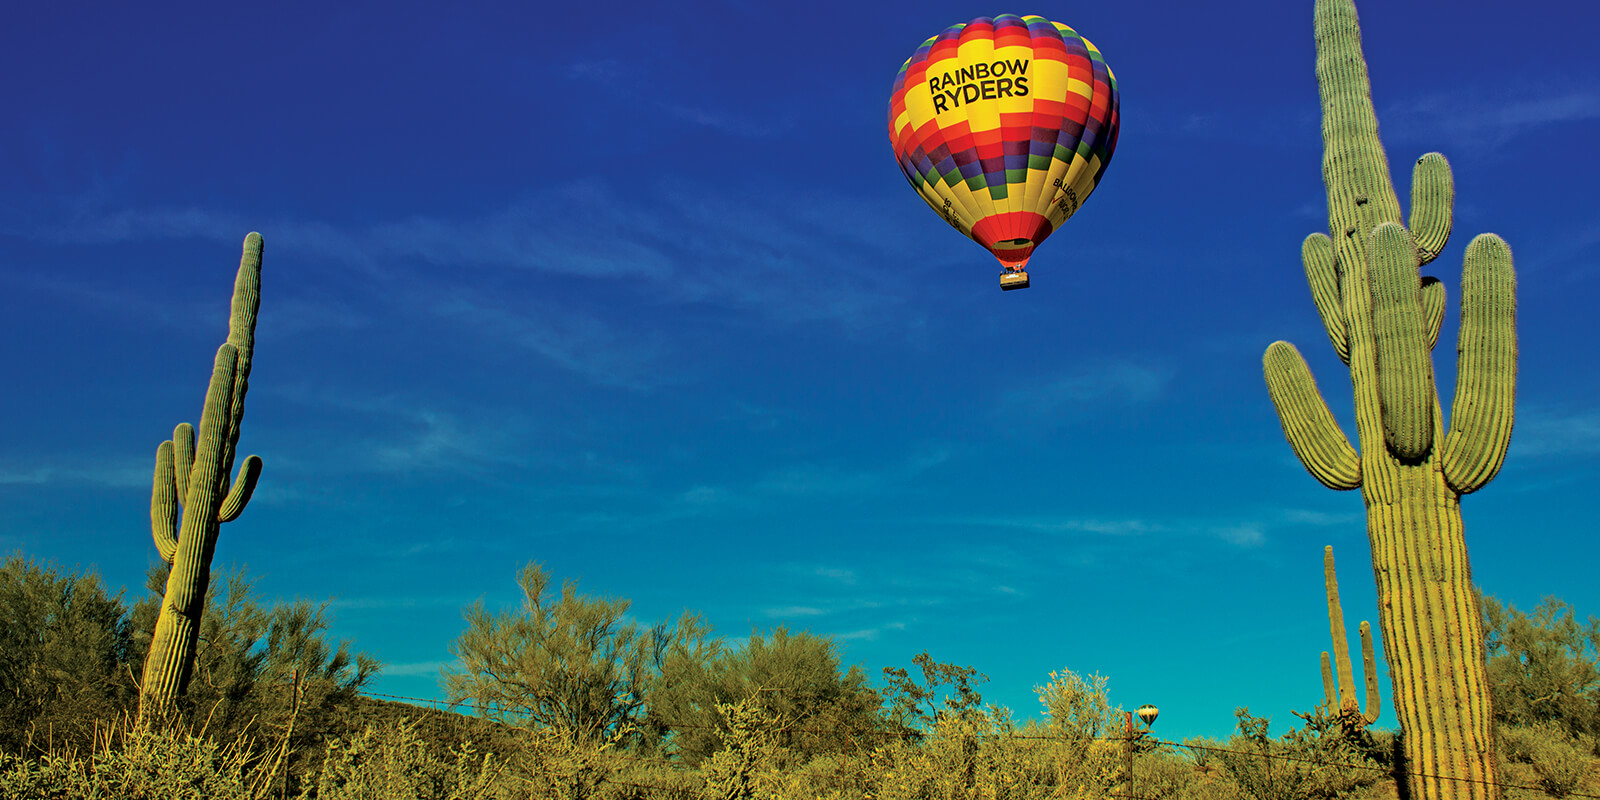 Airfare to Arizona and a hot air balloon ride for two | VacationistUSA